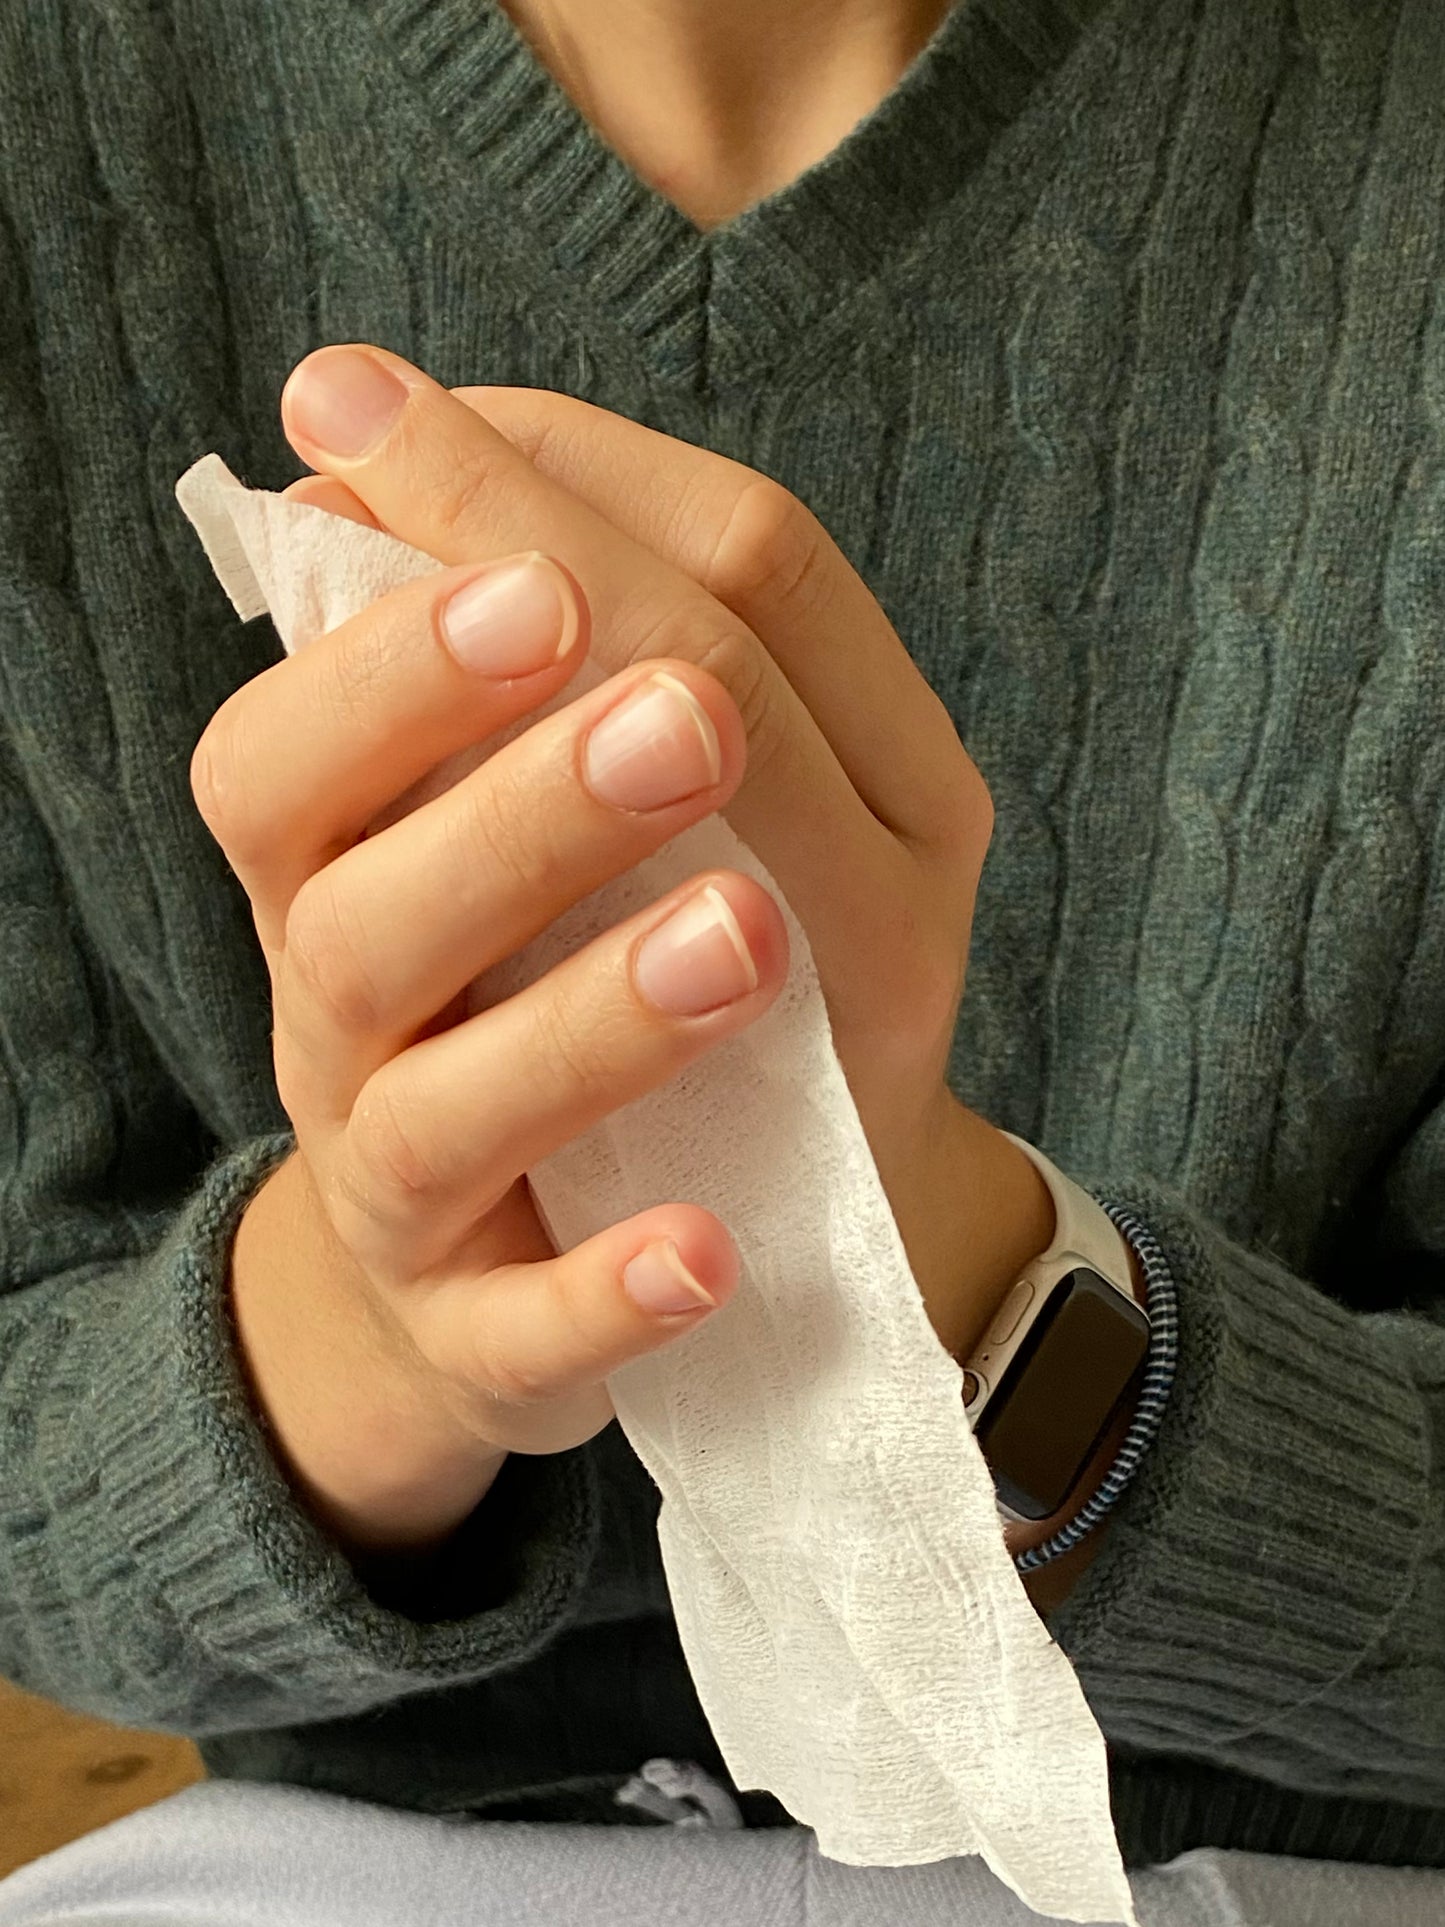 A woman using a NEATwipes Lavender hand wipe.